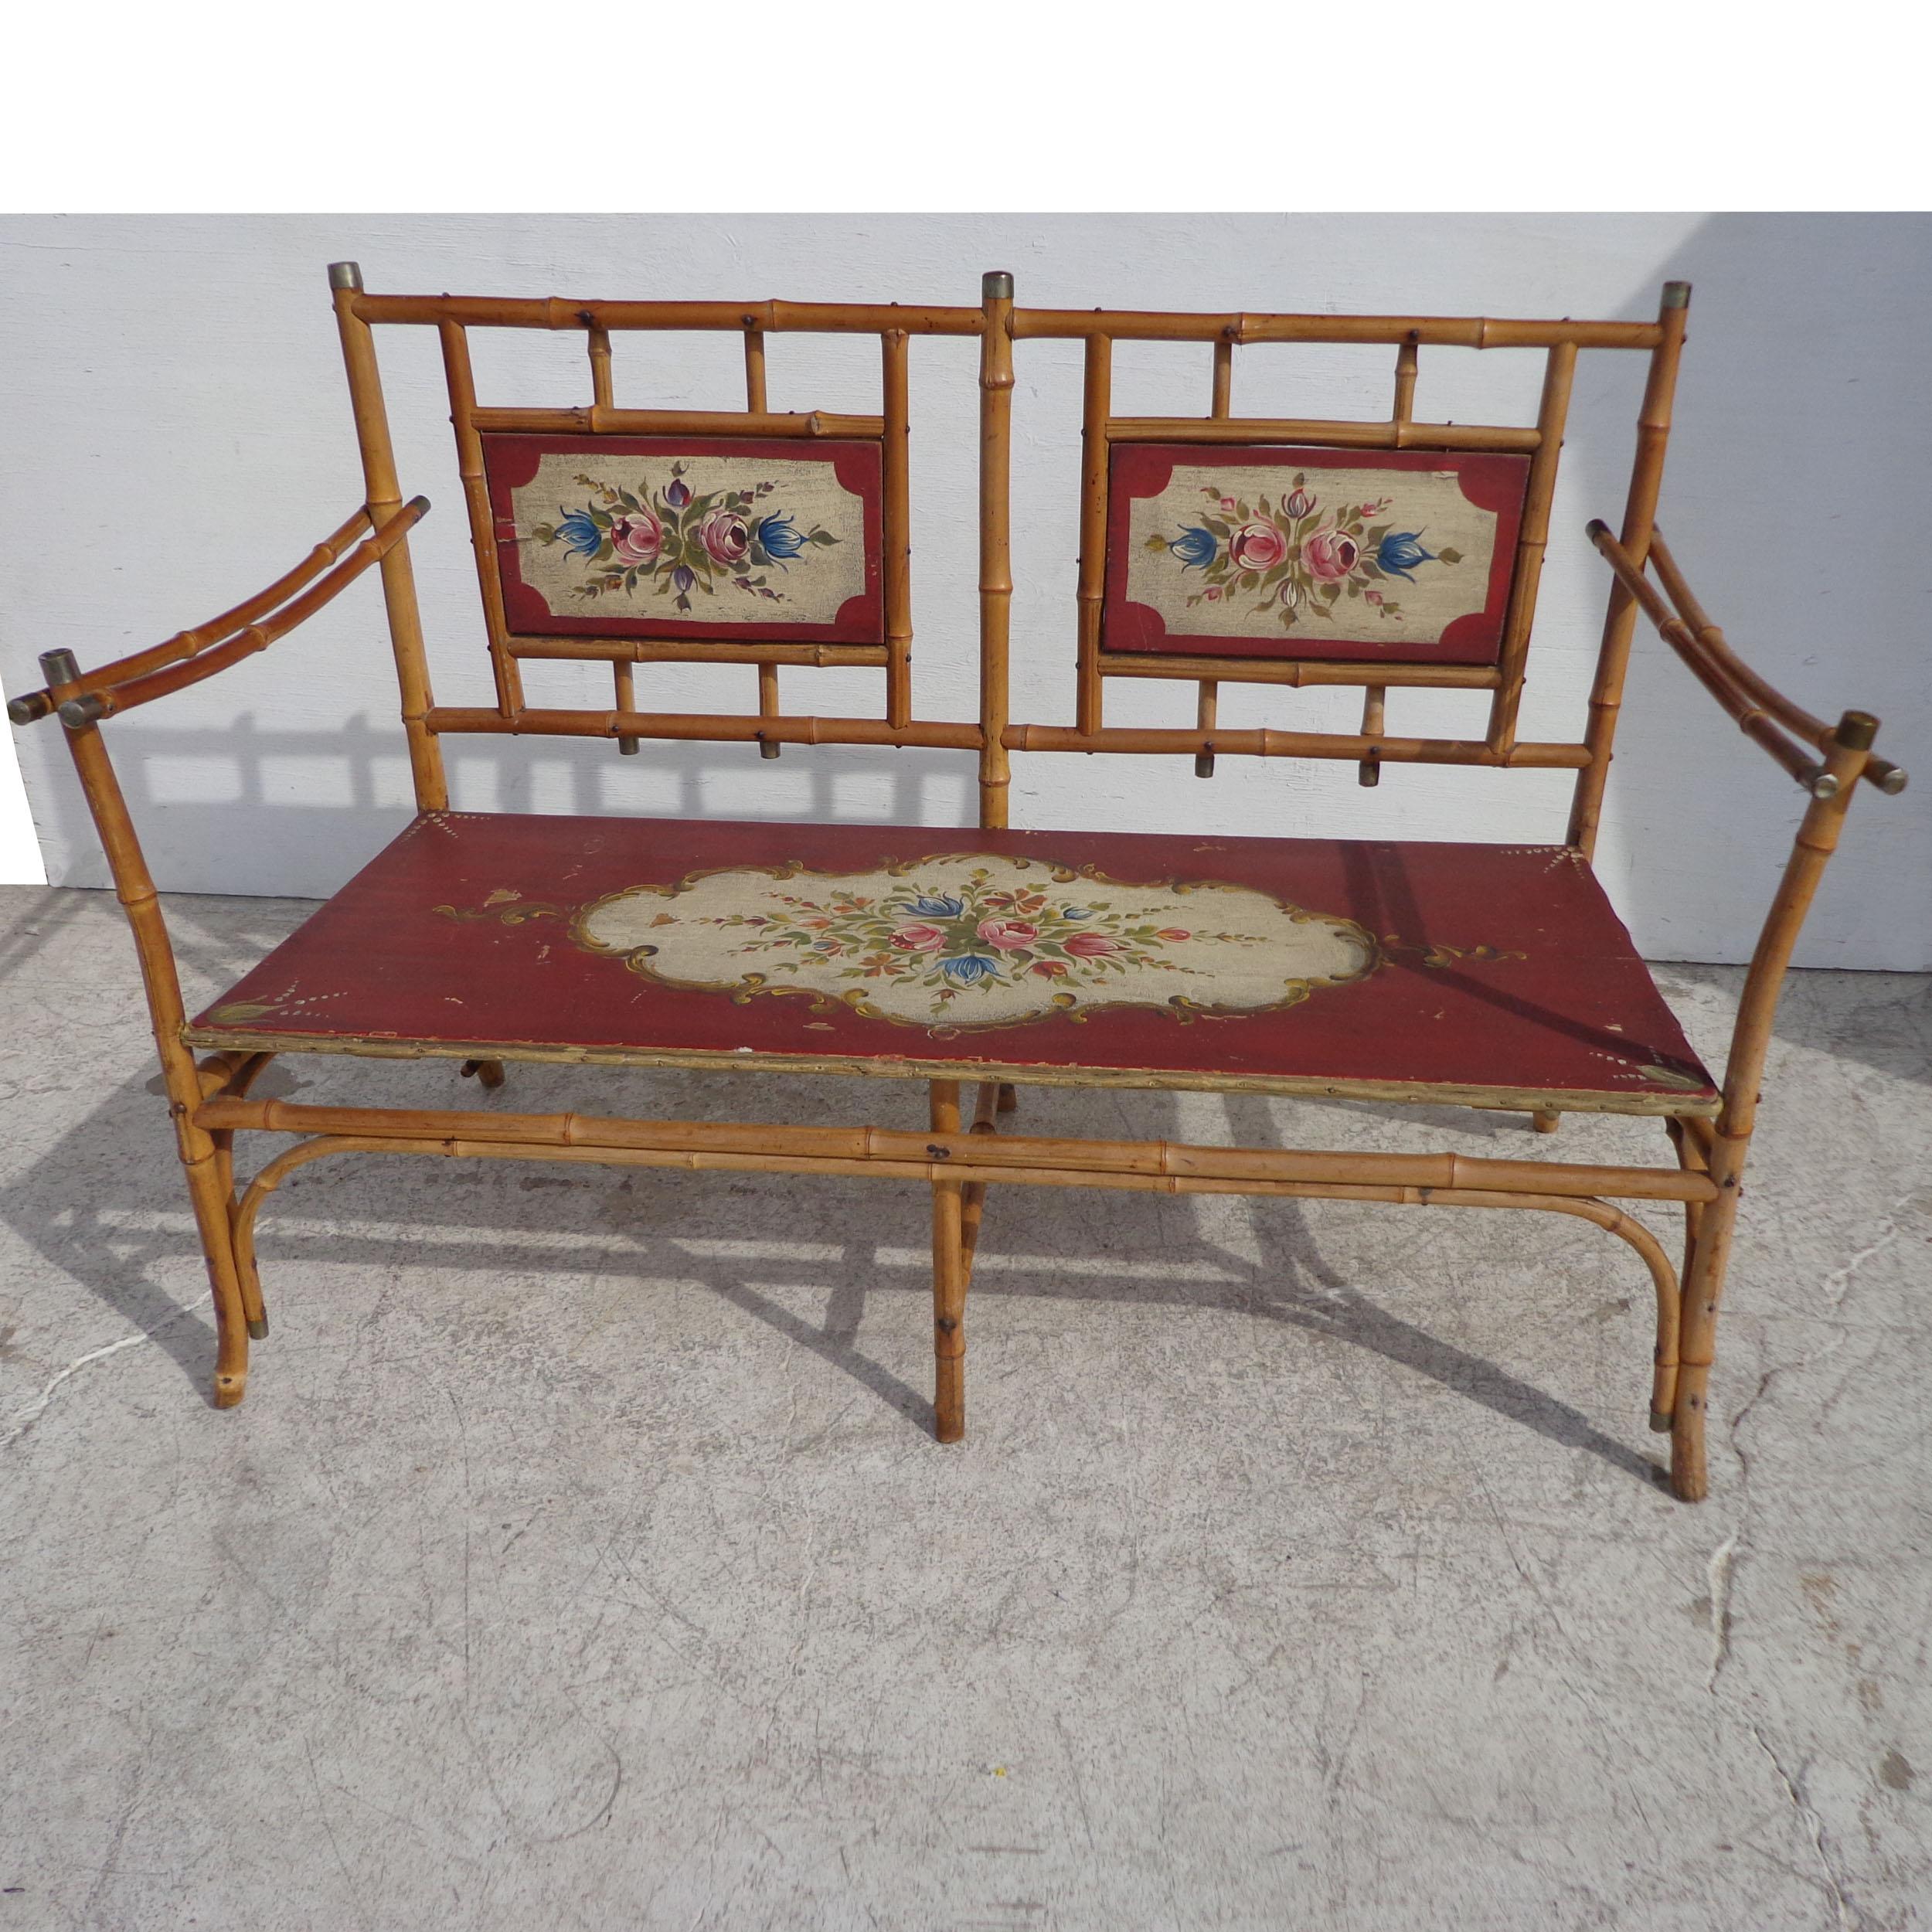 Antique Bamboo Eastlake Style settee

 Bamboo and hardwood construction with accents in brass. Hand painted seat and back in floral motifs.

53? Width x 22? Depth x 34.75? Height

Seat Height 15?

Arm Height 34.5?.